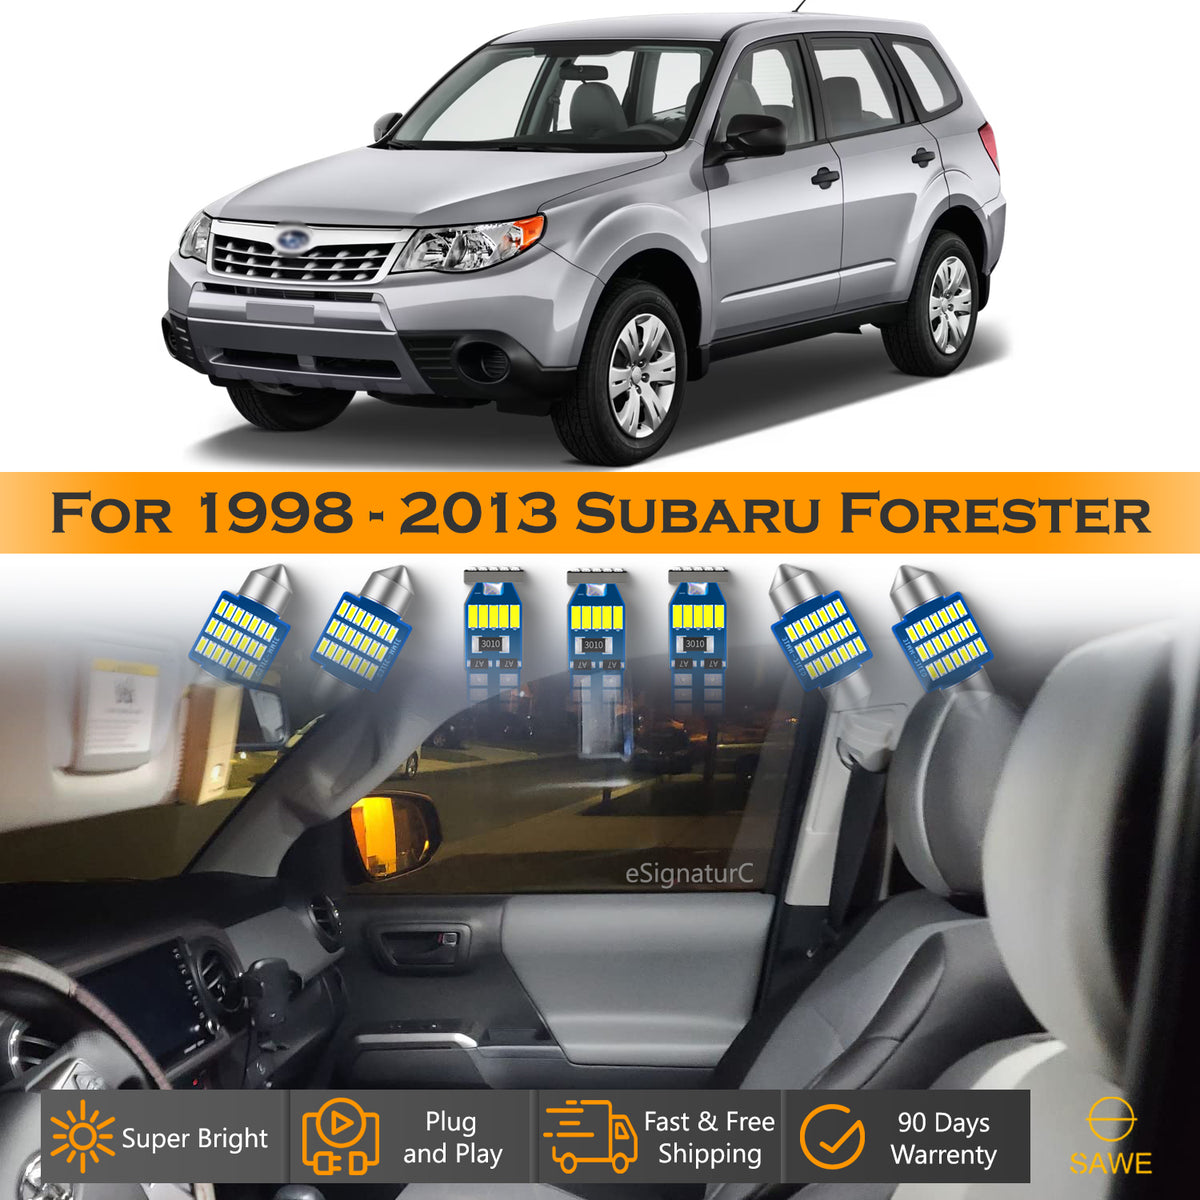 For Subaru Forester Interior LED Lights - Dome & Map Light Bulbs Package Kit for 1998 - 2013 - White